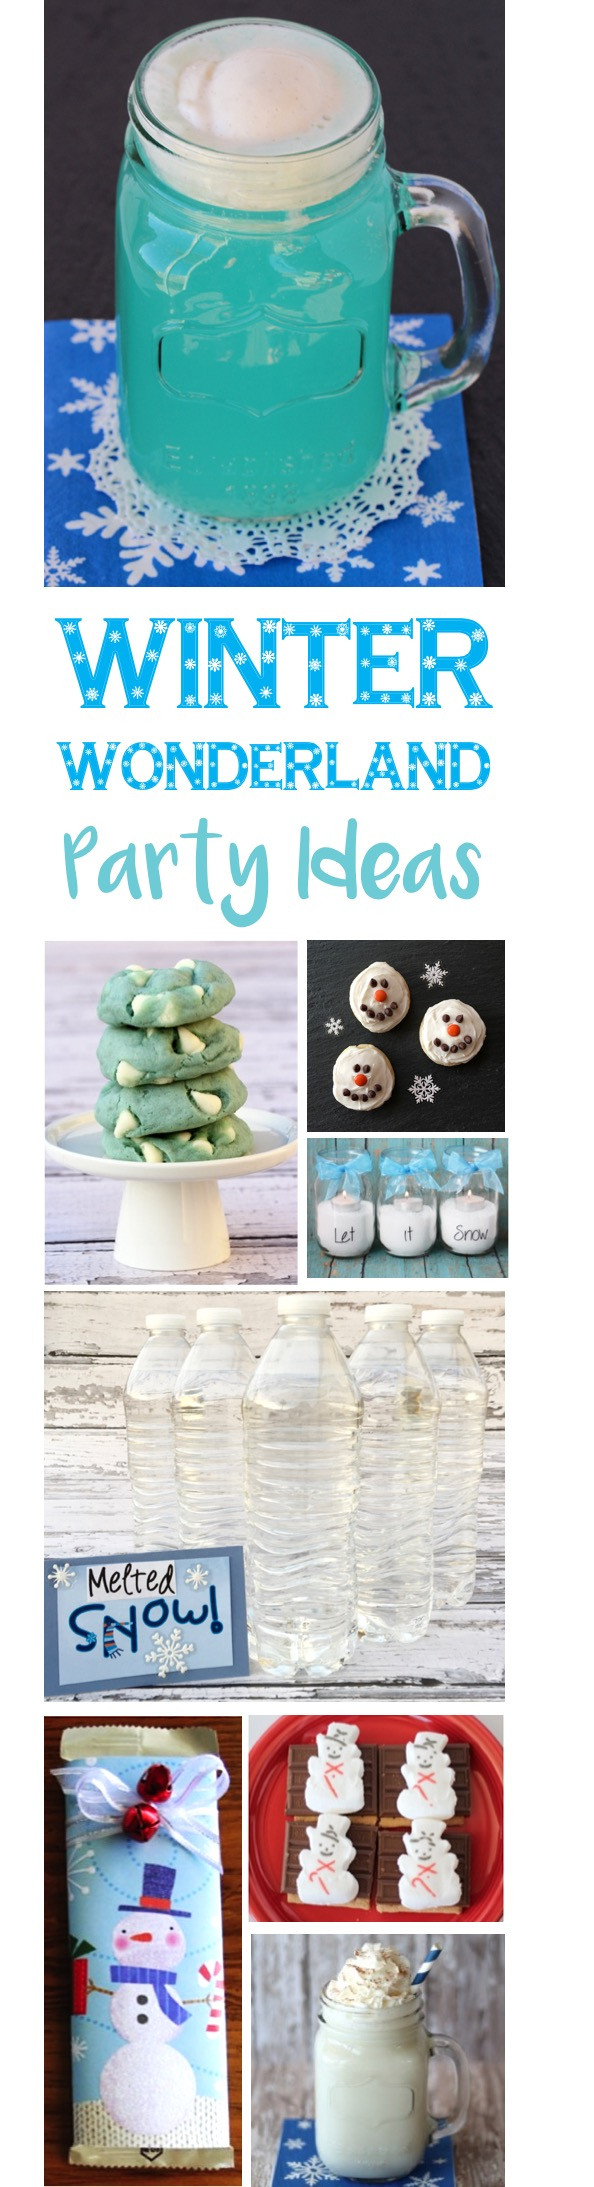 Food Ideas For A Winter Beach Party
 20 Winter Wonderland Party Ideas food decor more